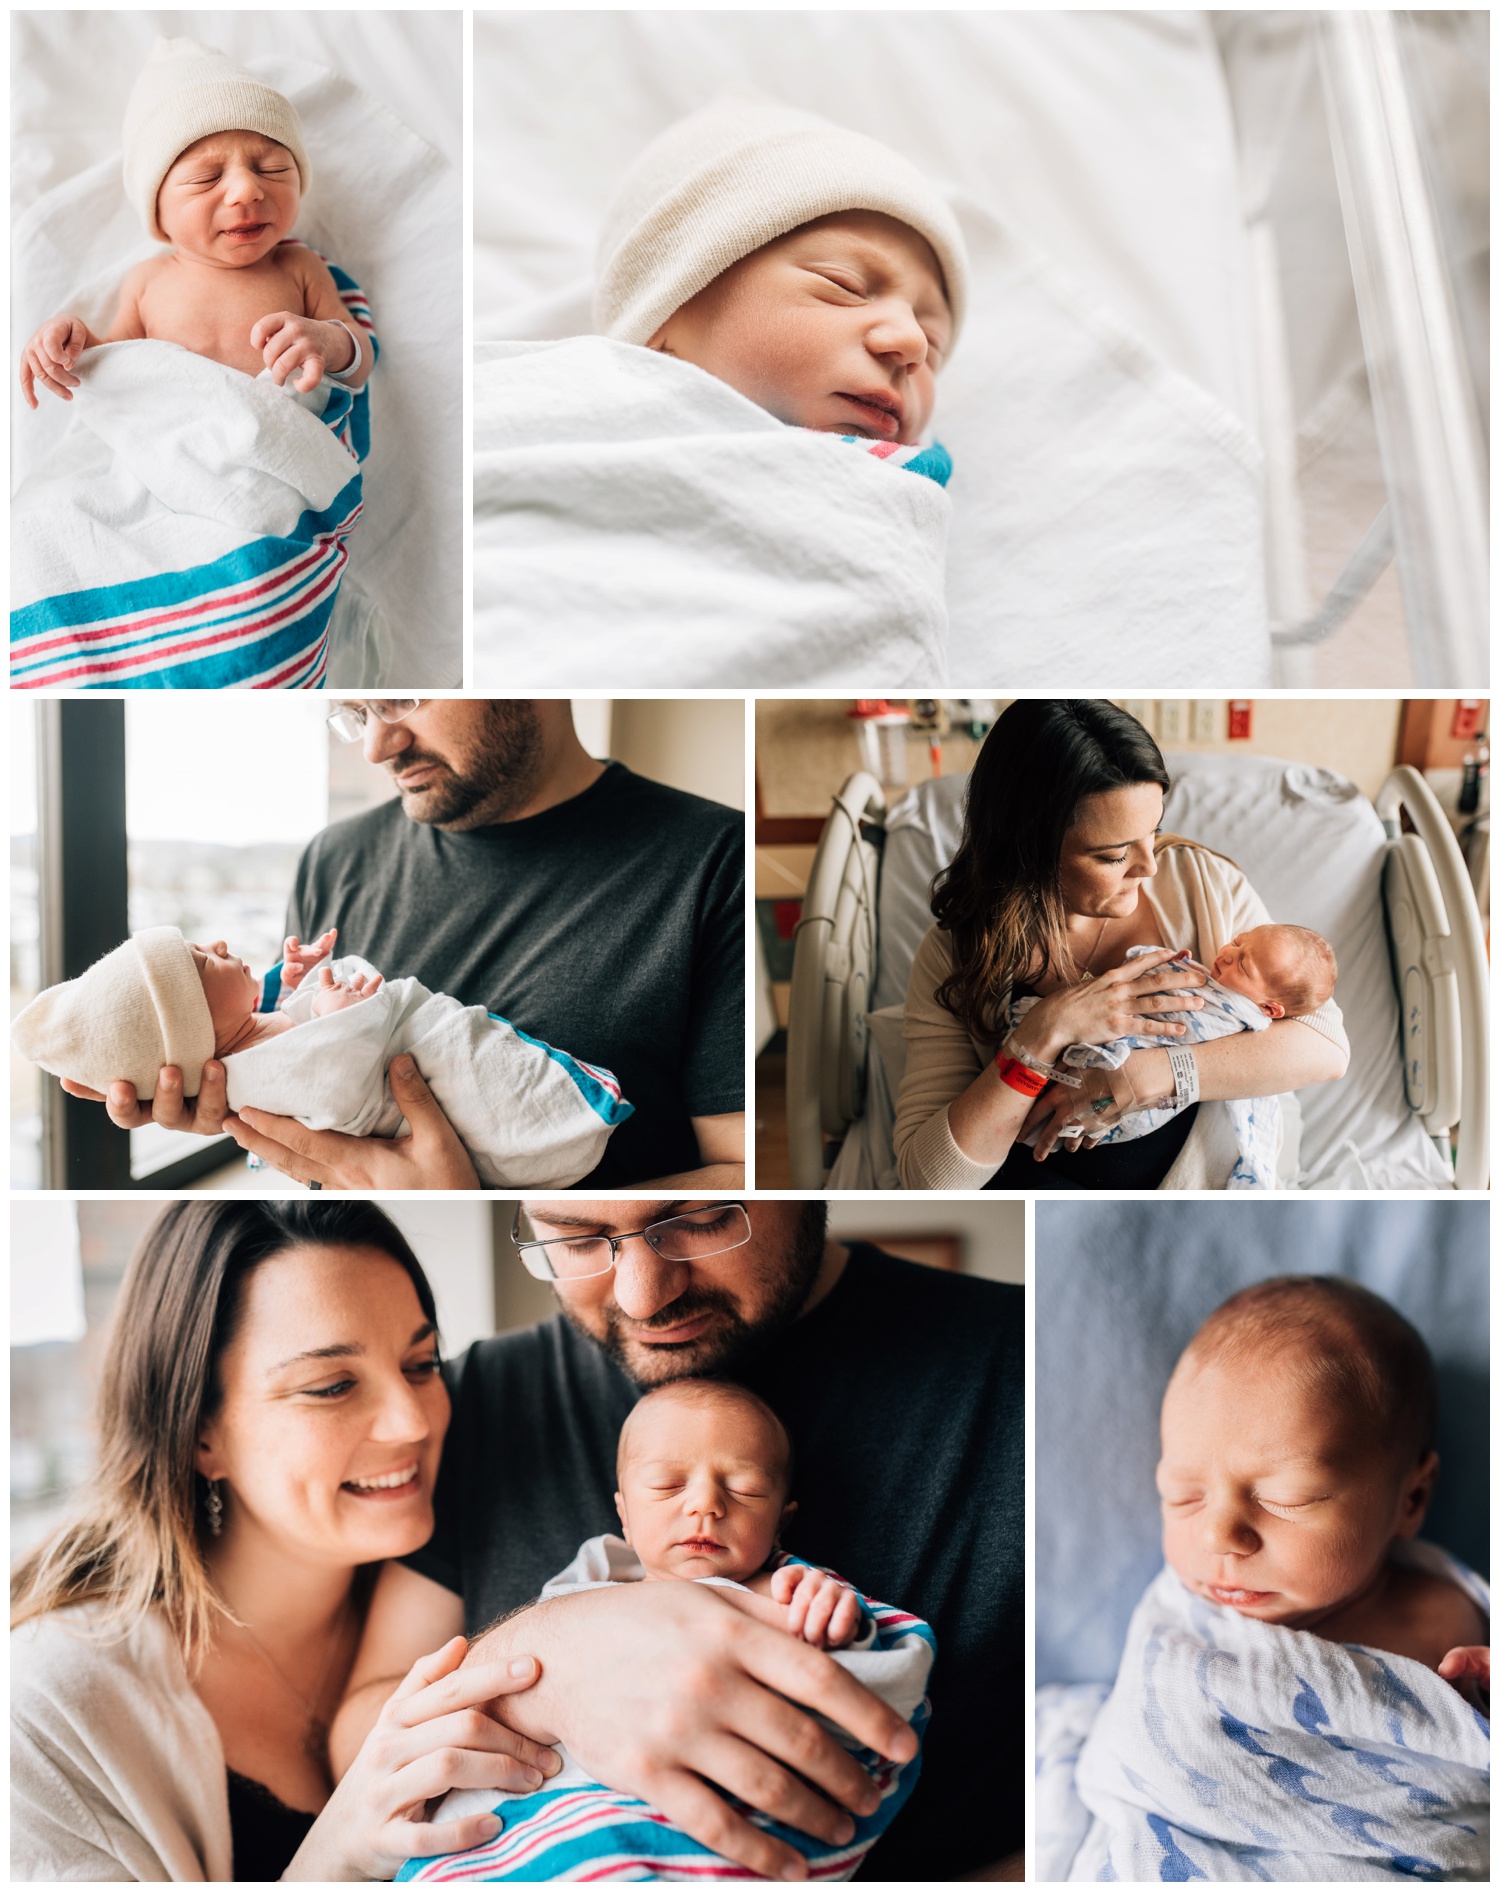 Baby Starr  Grayson's First Month — Saratoga Springs Baby Photographer,  Nicole Starr Photography